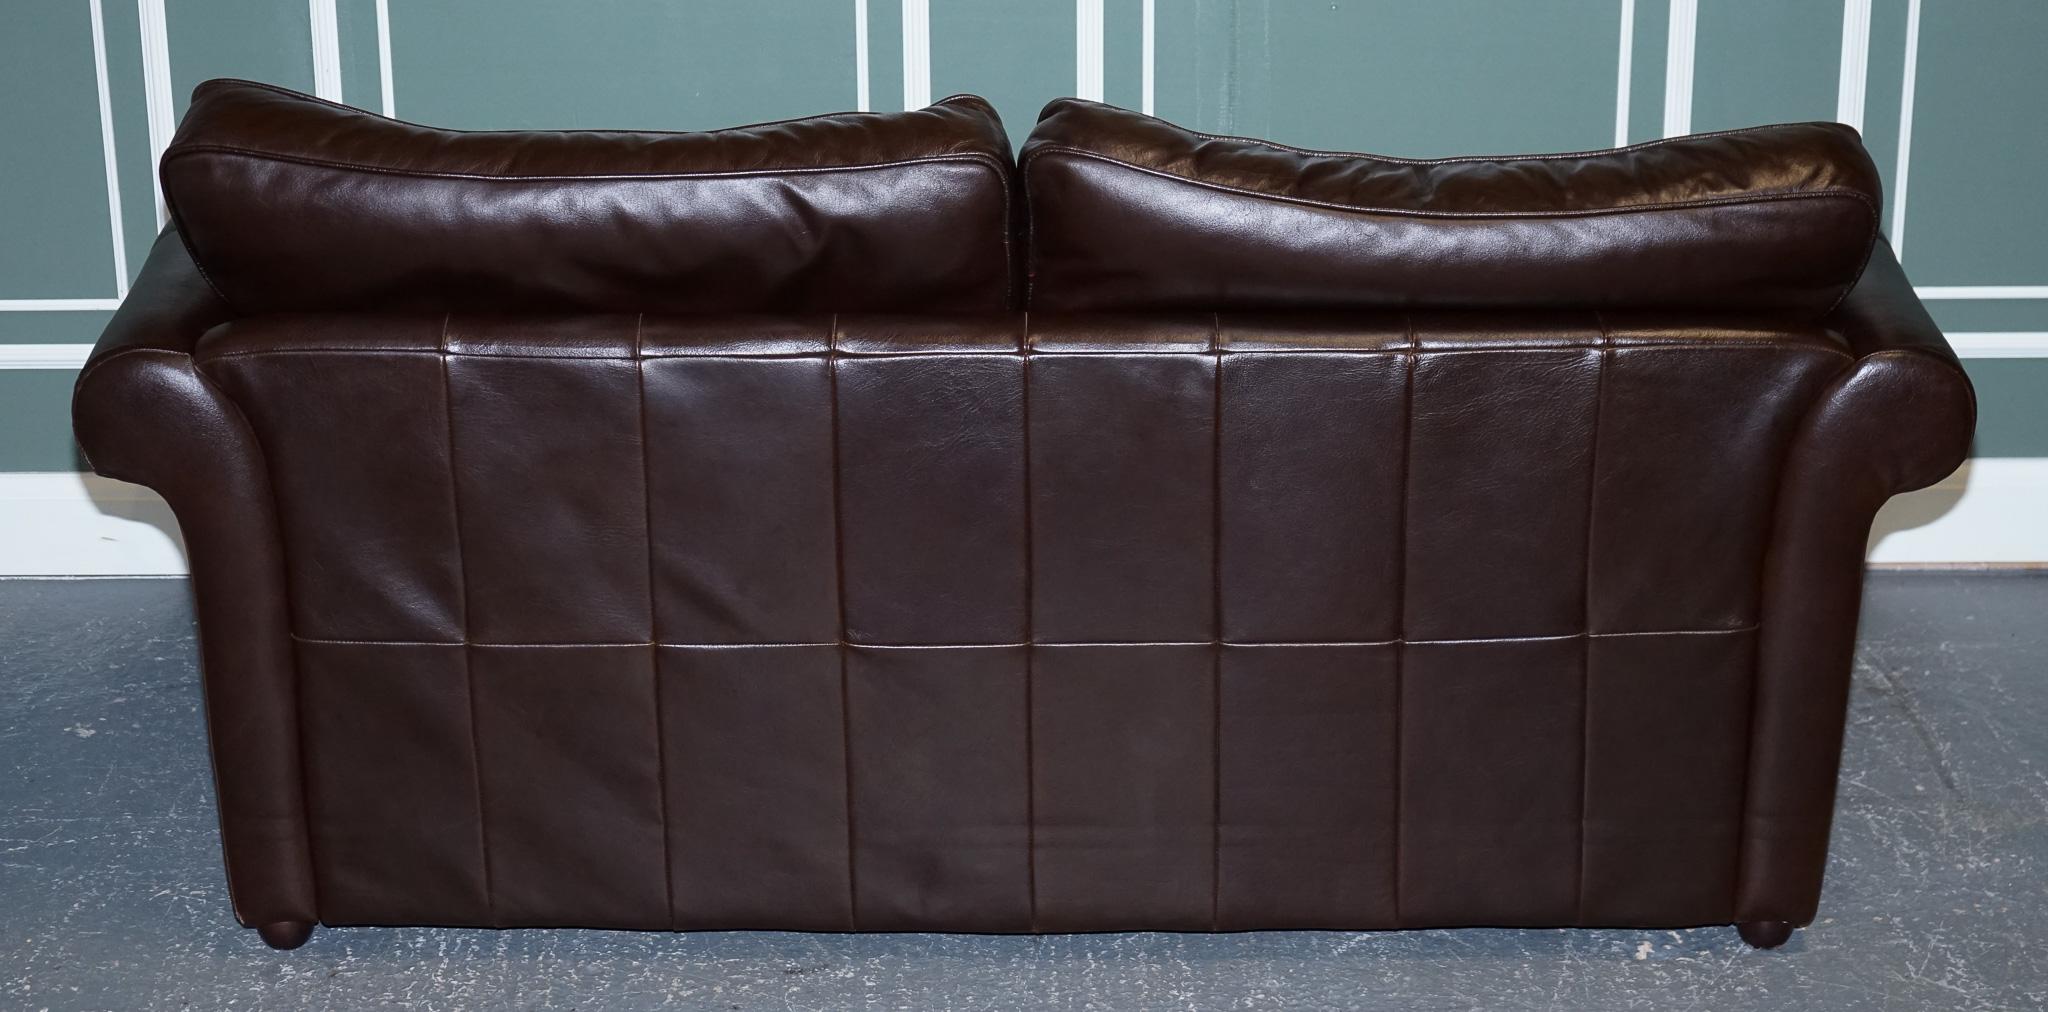 VINTAGE STUNNiNG CHOCOLATE BROWN LEATHER 2 TO 3 SEATER SOFA For Sale 5